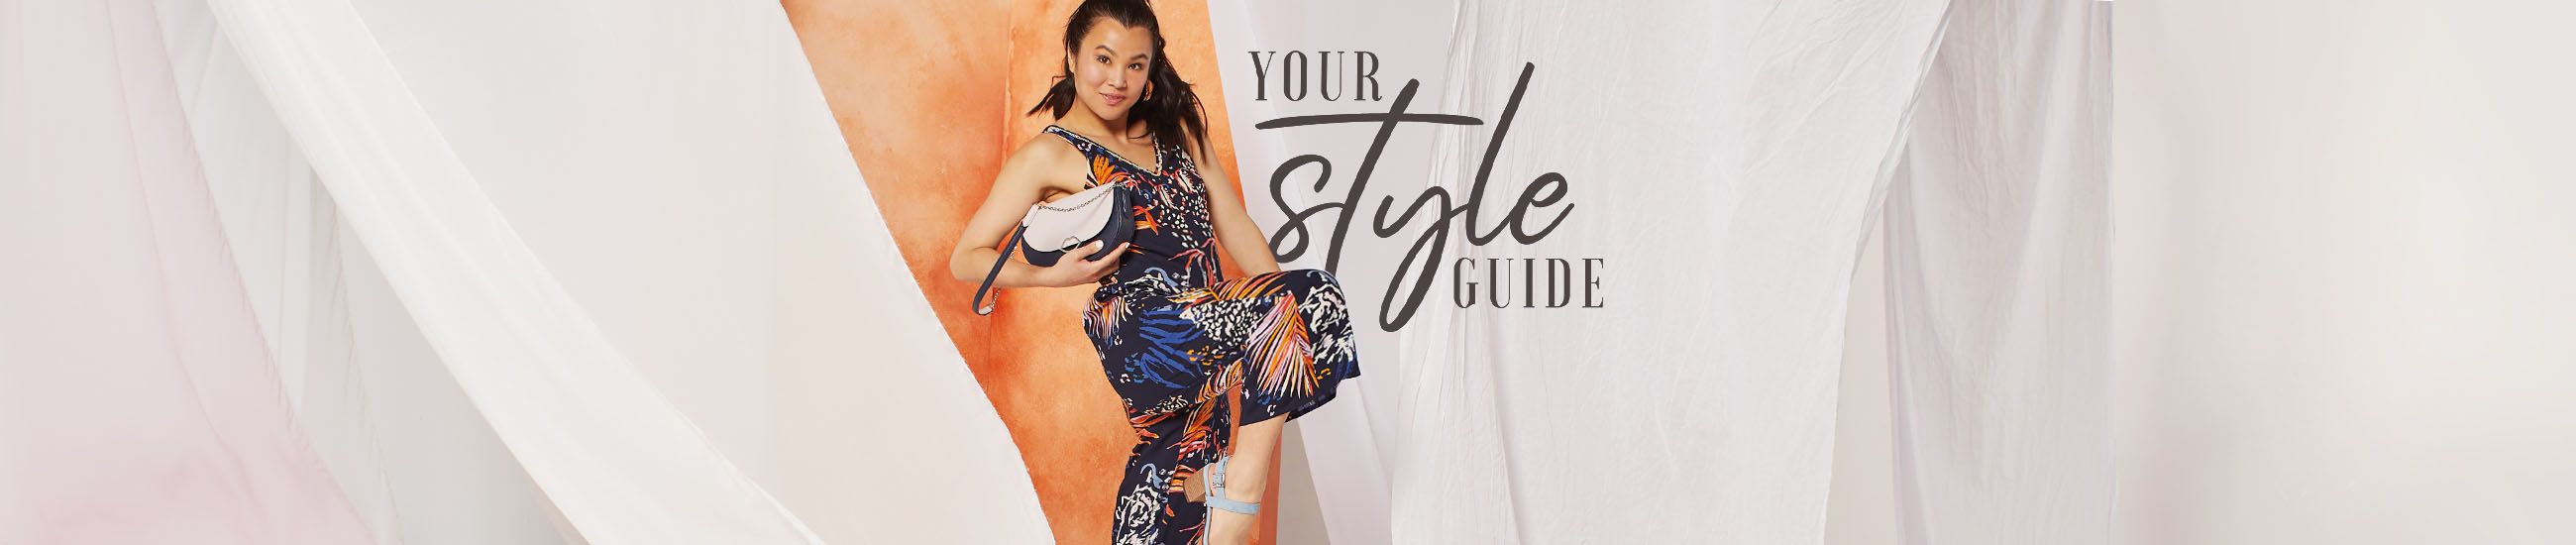 Your Style Guide - Return to Fabulous